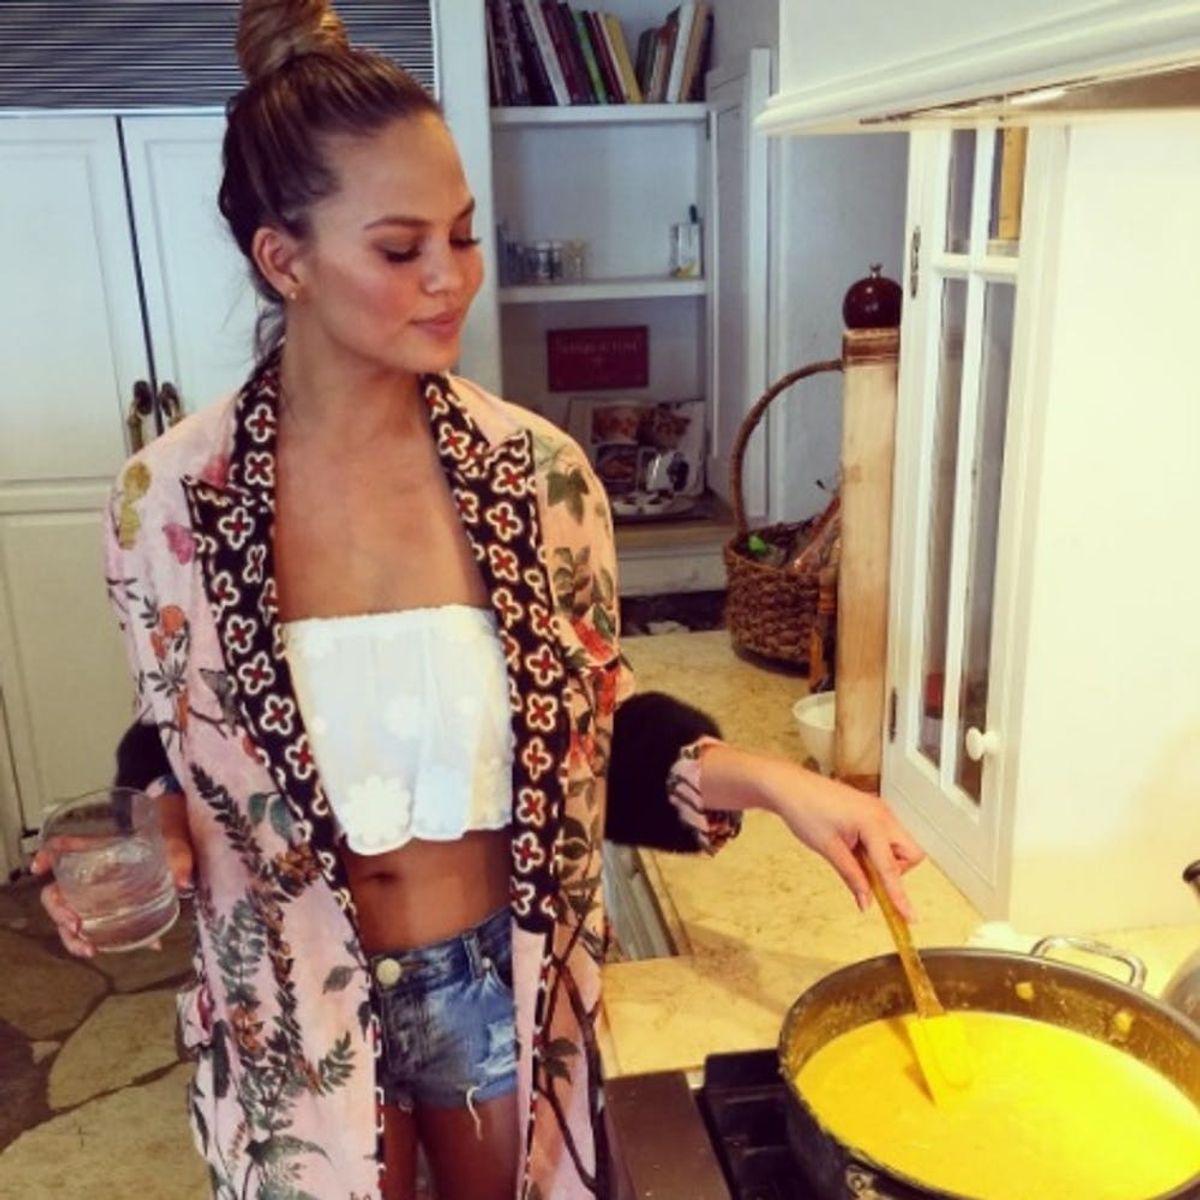 Chrissy Teigen Just Made an Unexpectedly Dramatic Diet Change